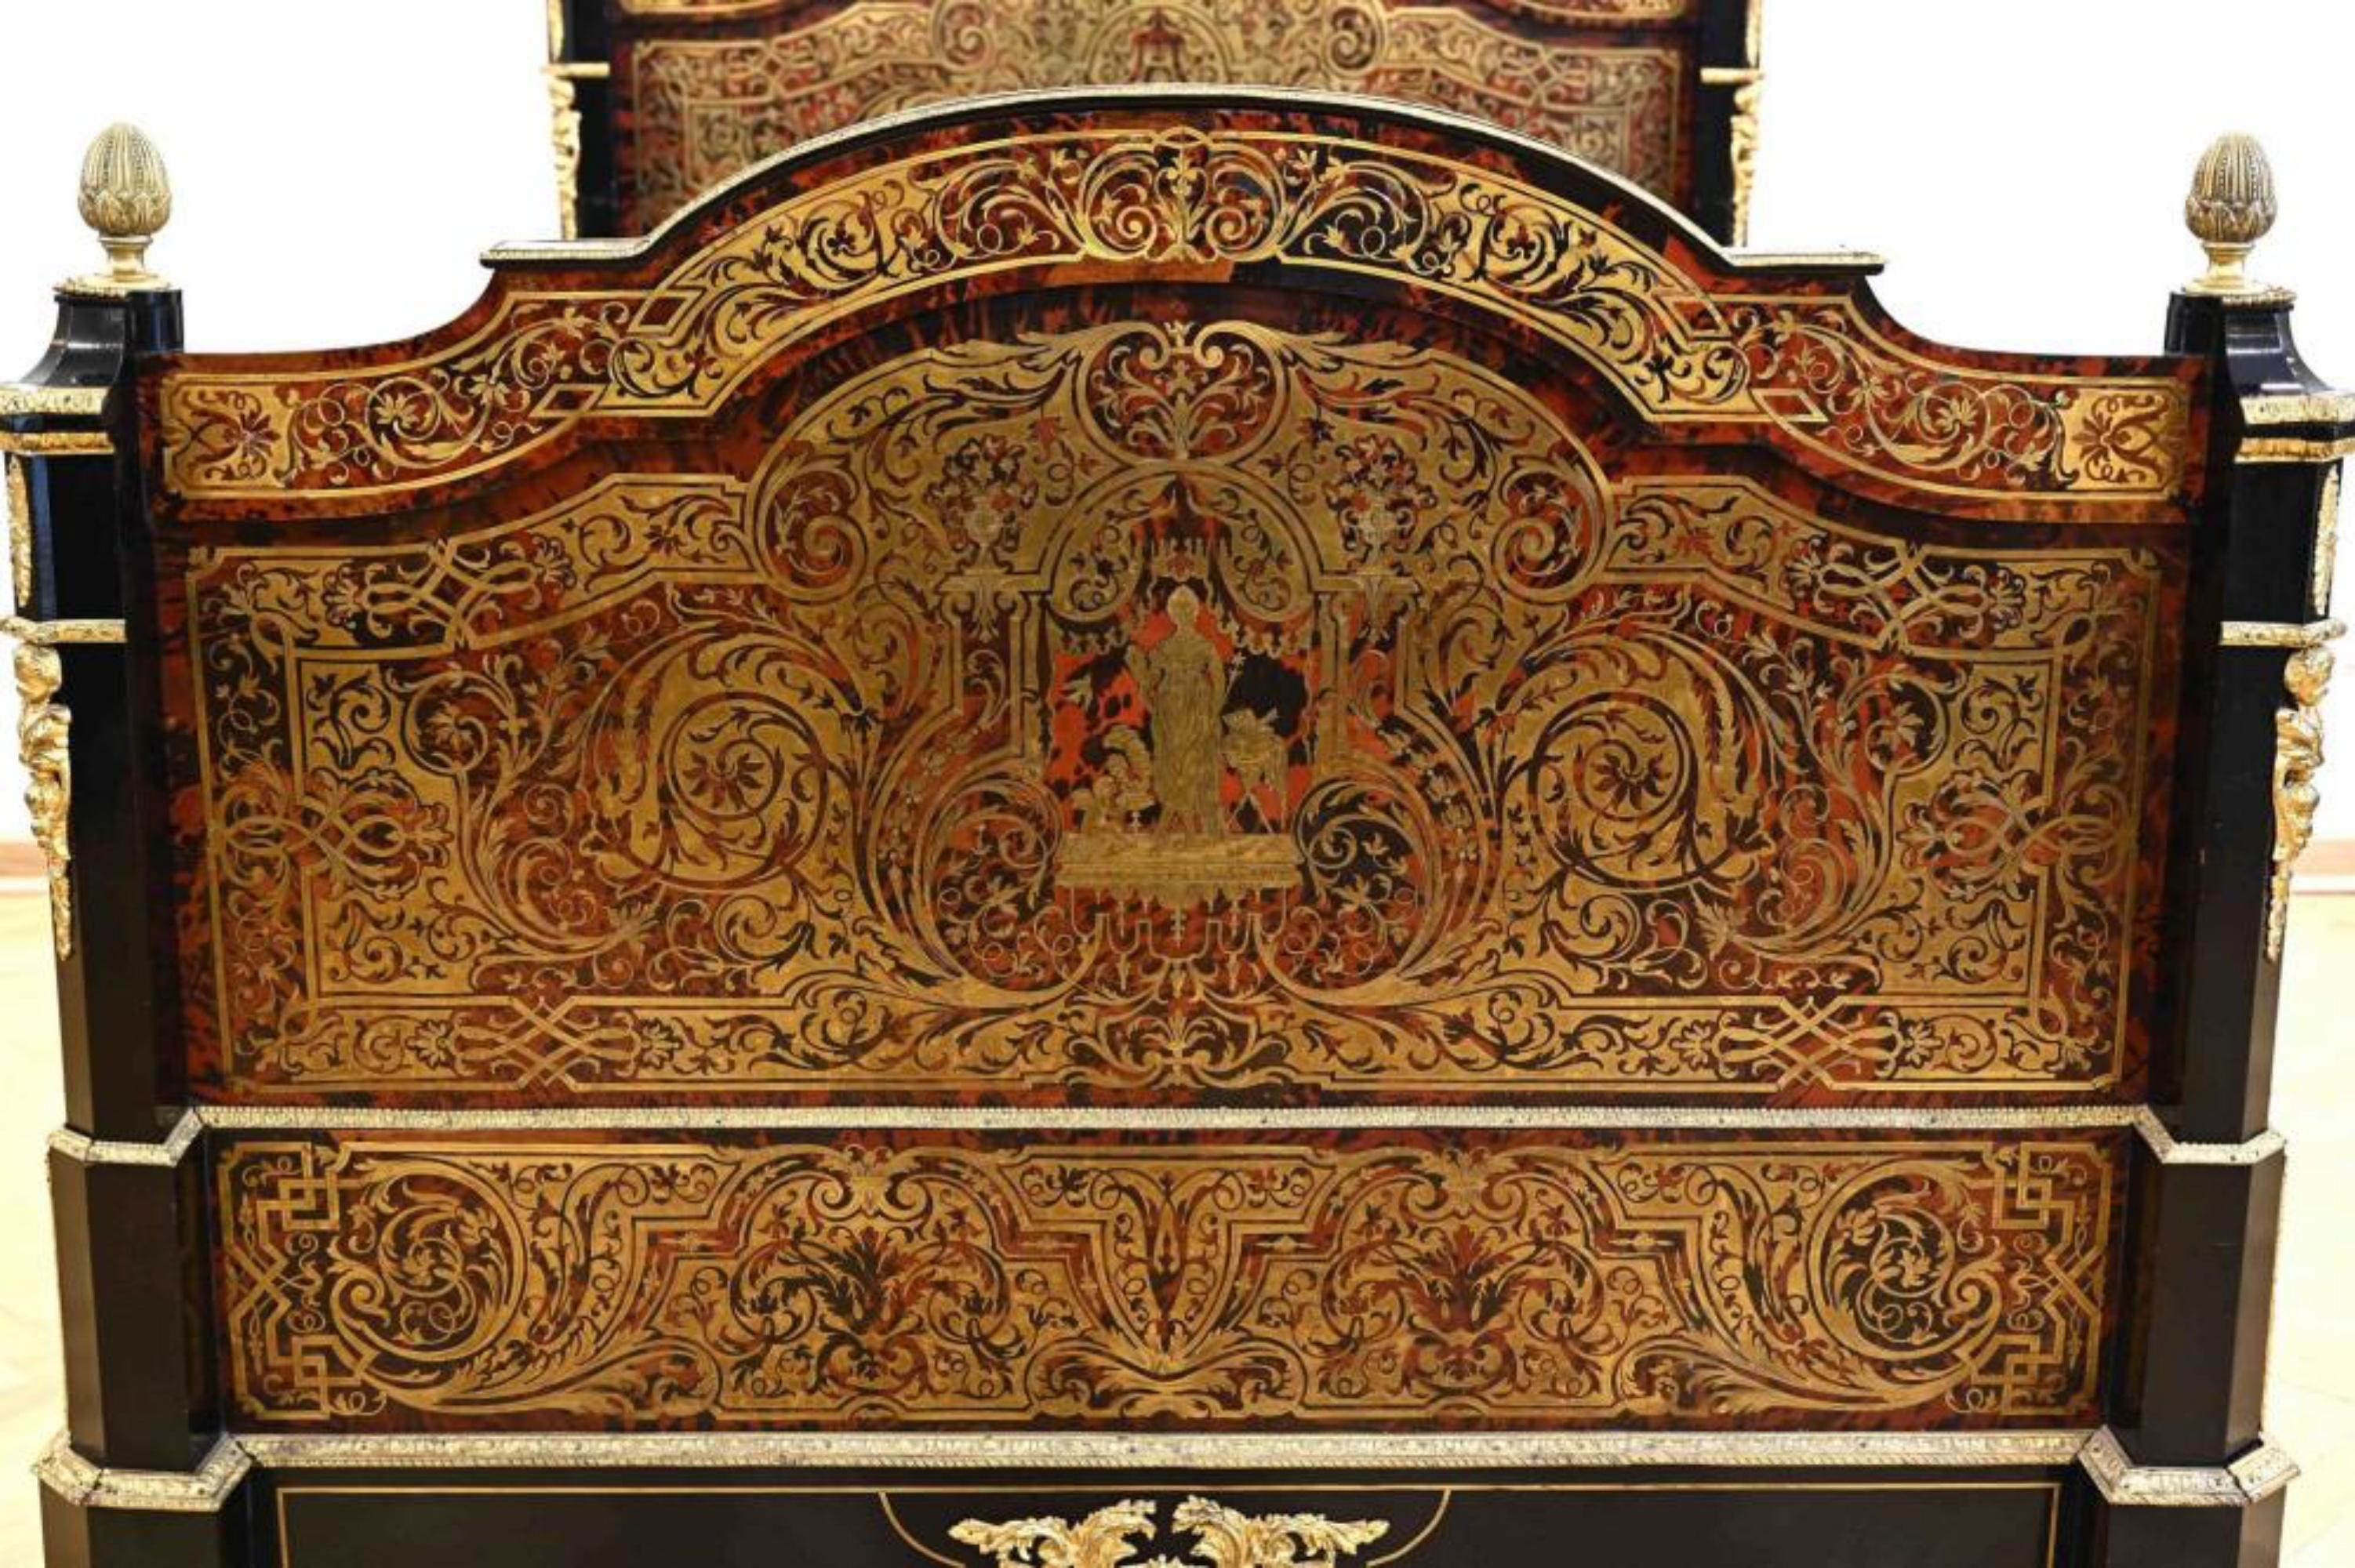 Royal bed with incredible marquetry in the style of the outstanding cabinet maker André-Charles Boulle. Made around 1870/80 in the Régence style / Napoleon Trois epoch, the exuberant love of ornament can be marveled at in the most artistic form.